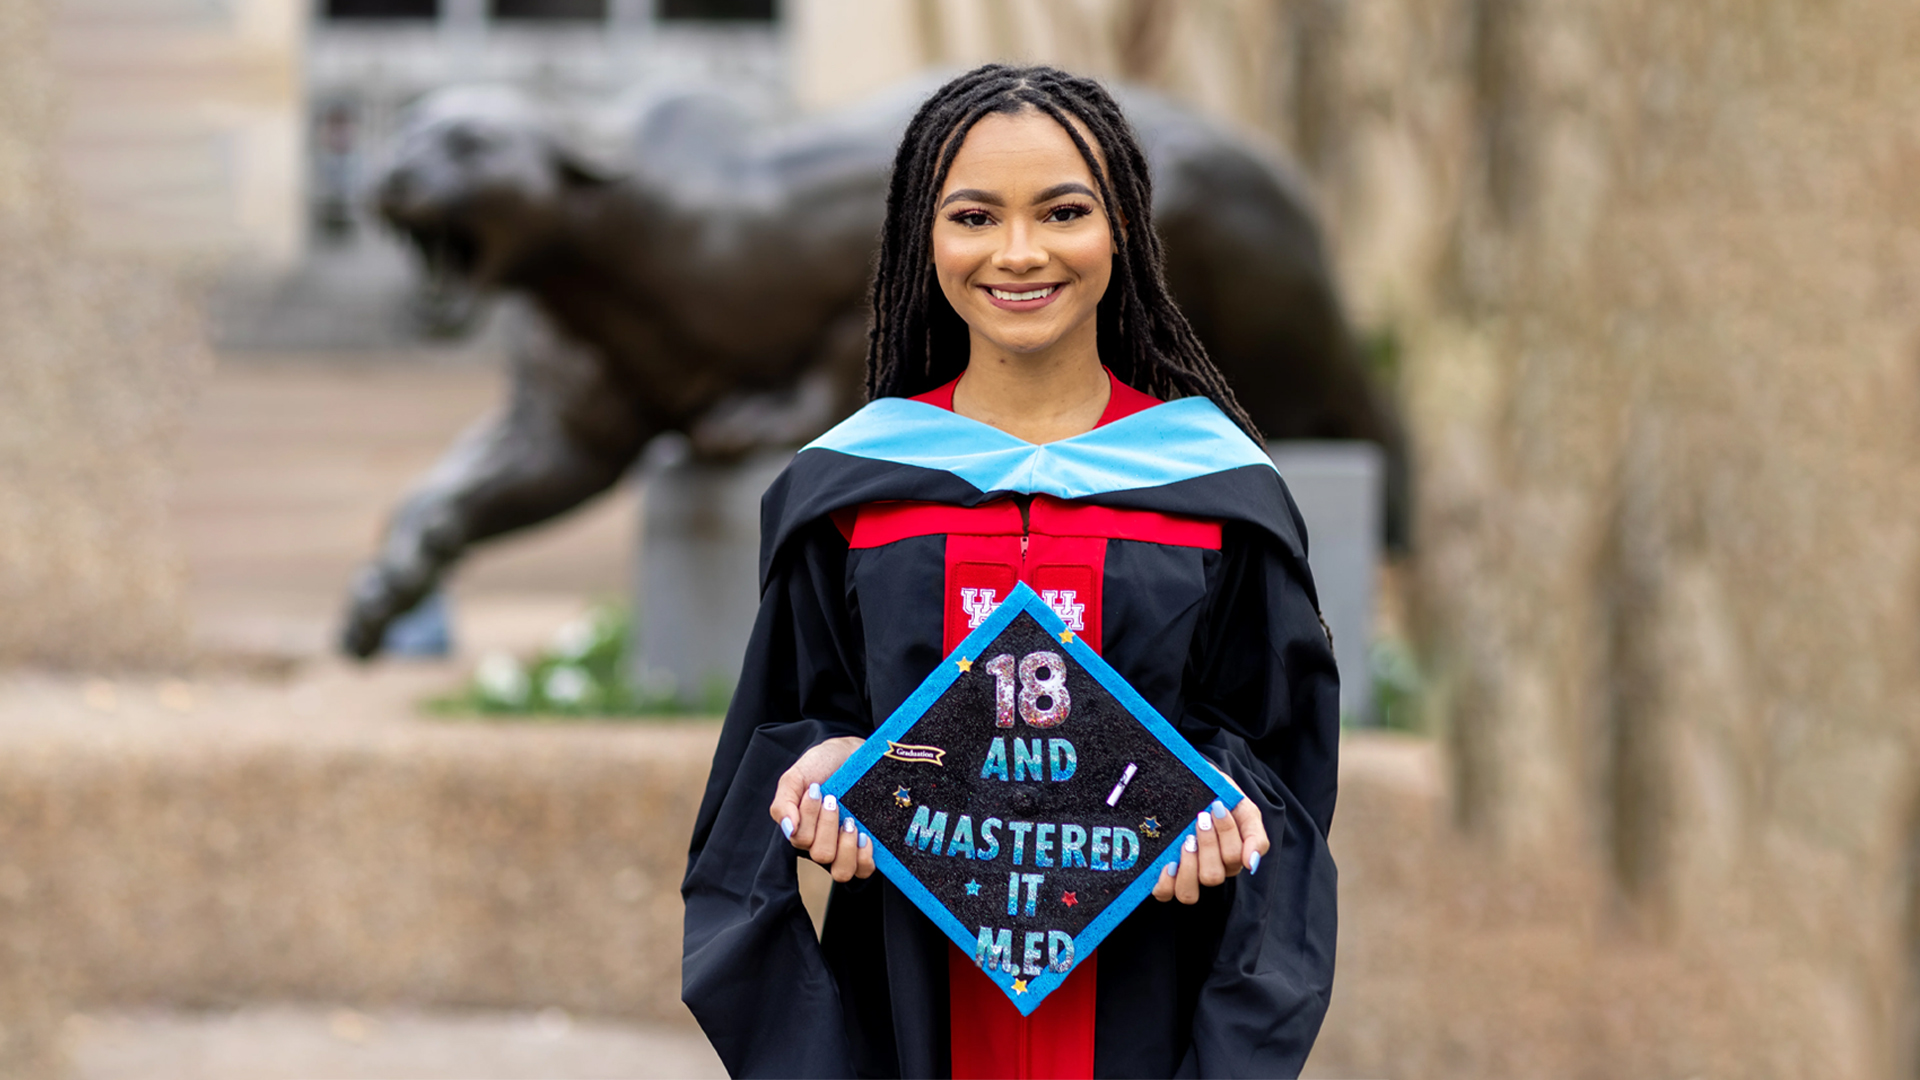 Salenah Cartier Repeats History As The Youngest University Of Houston Graduate For The Second Year In A Row